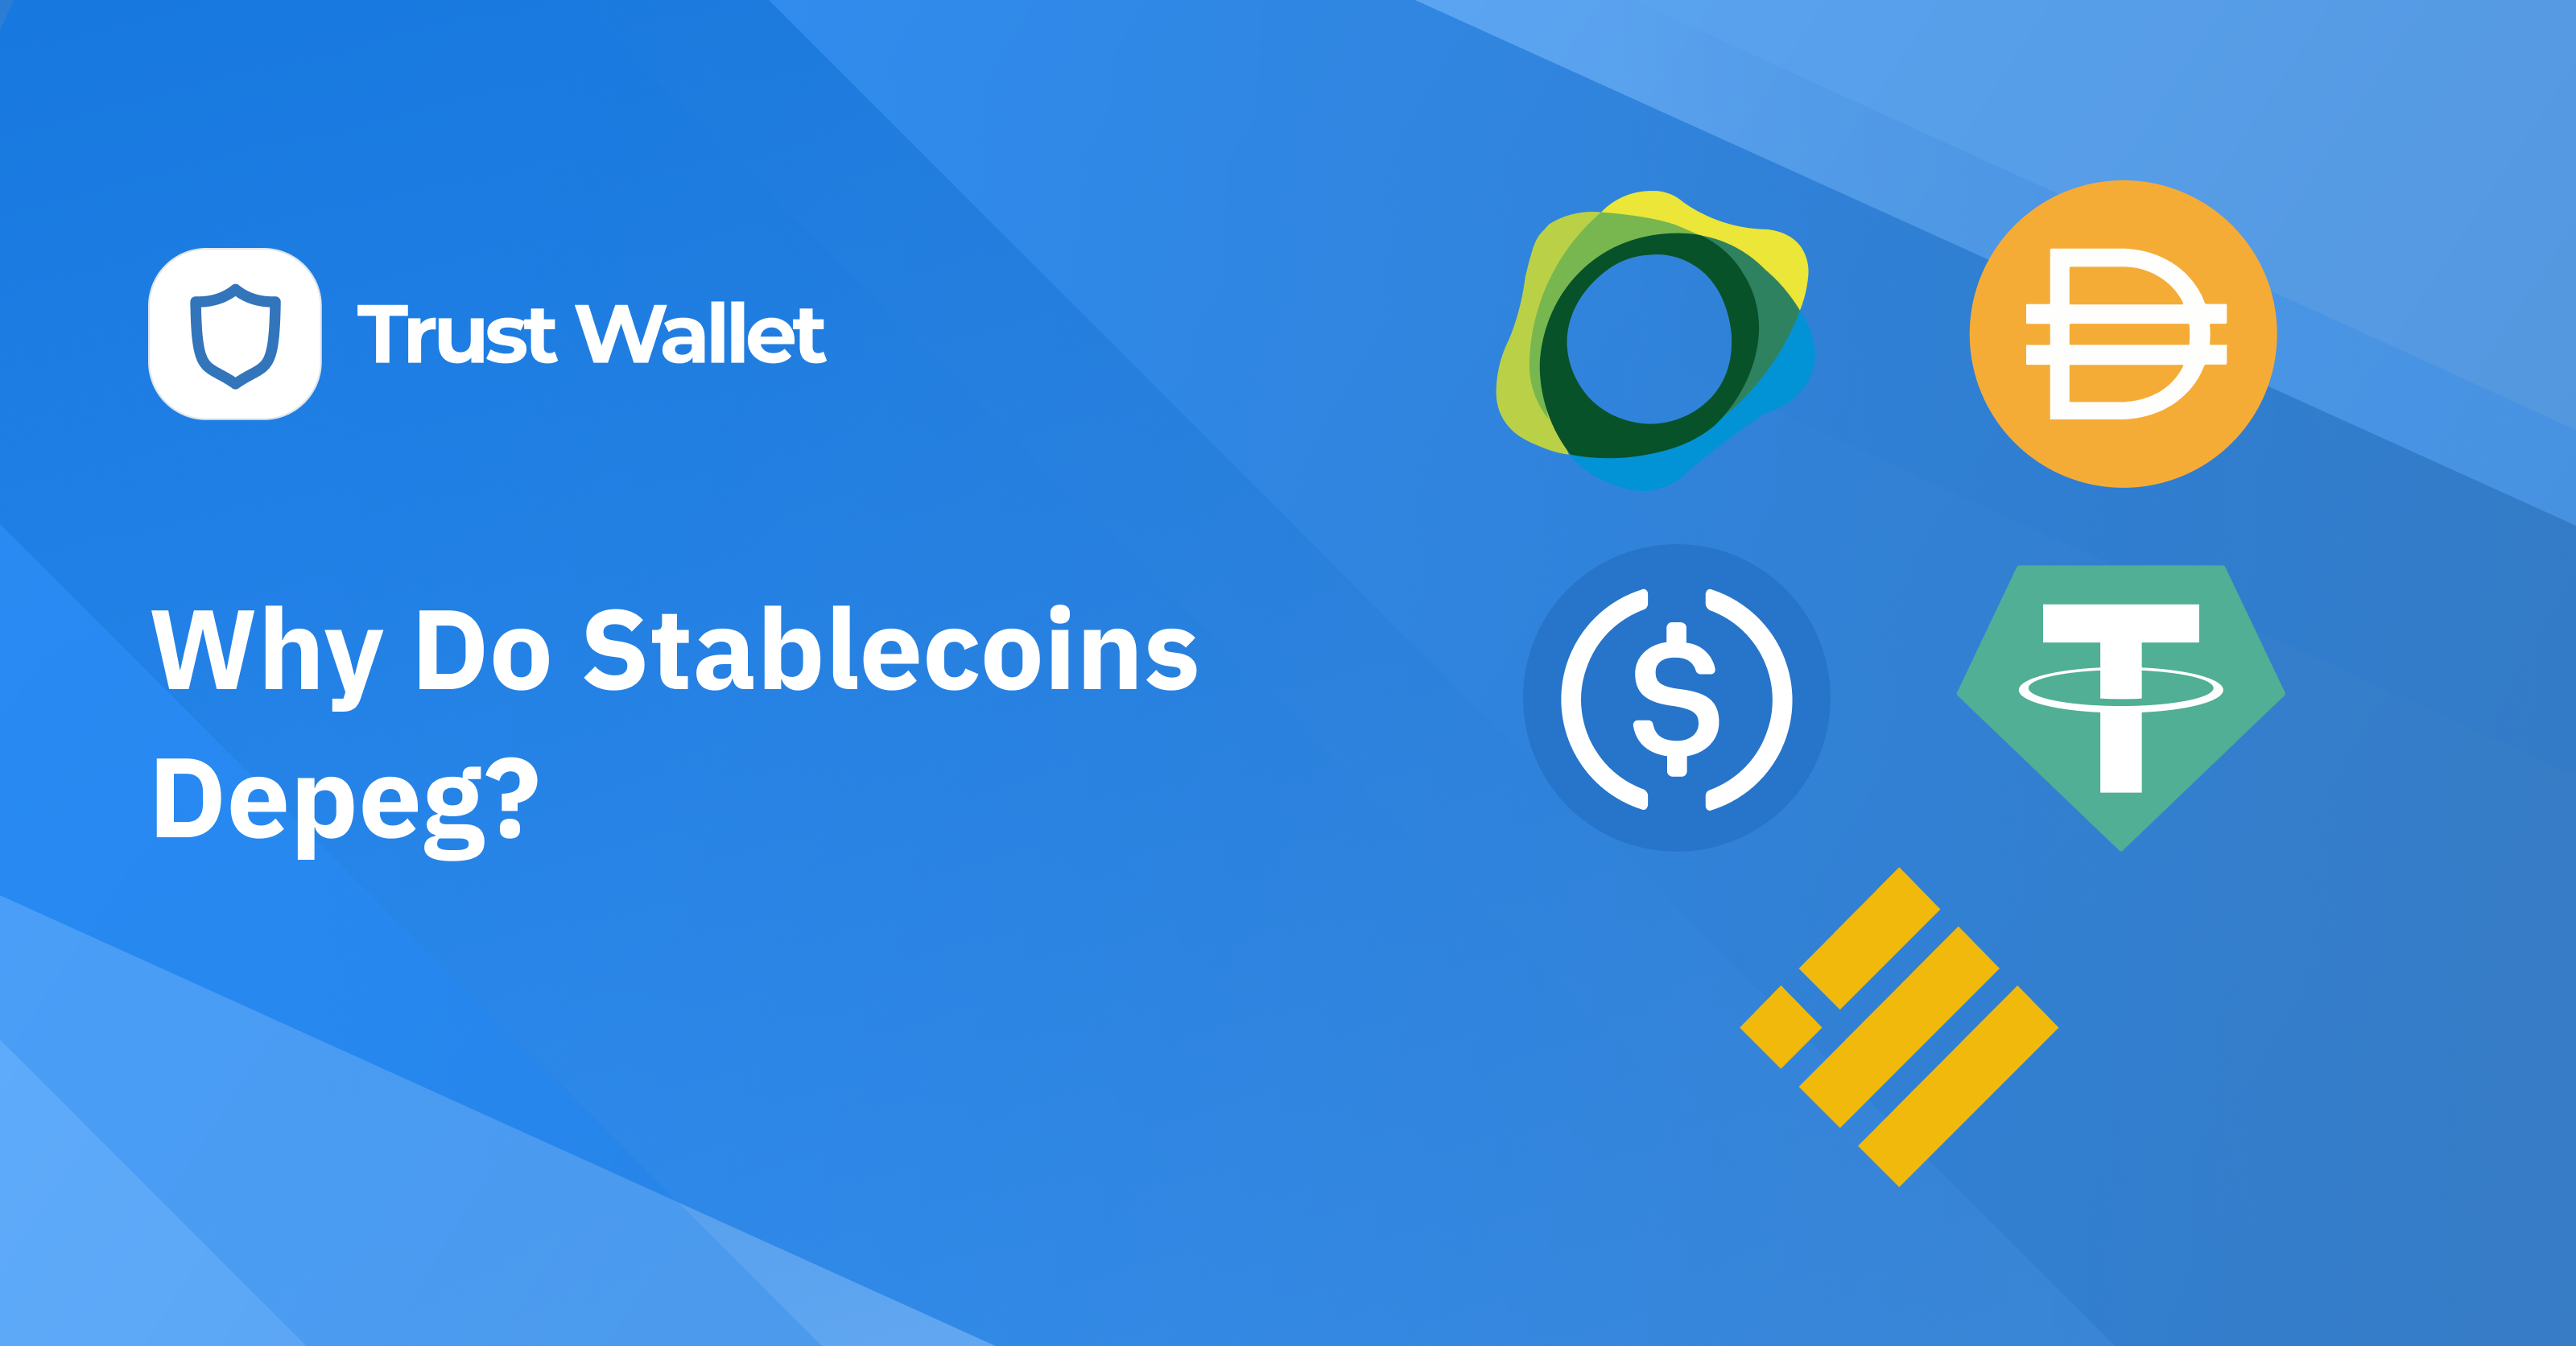 Why Do Stablecoins Depeg?